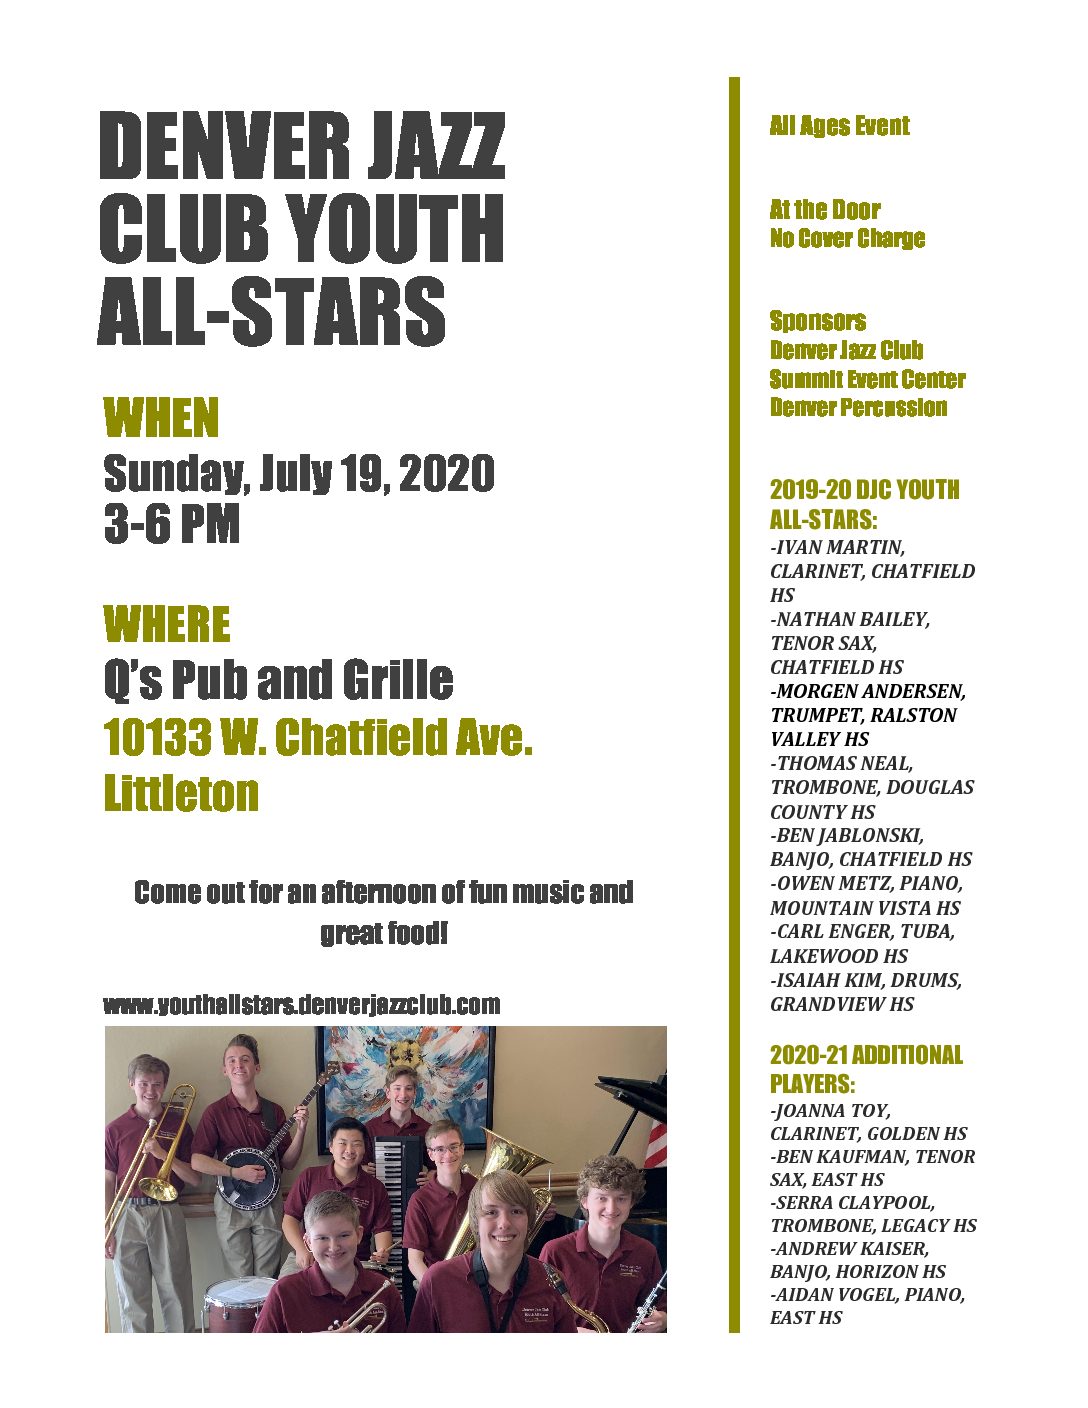 The 2019-20 Denver Jazz Club Youth All-Stars Farewell Concert